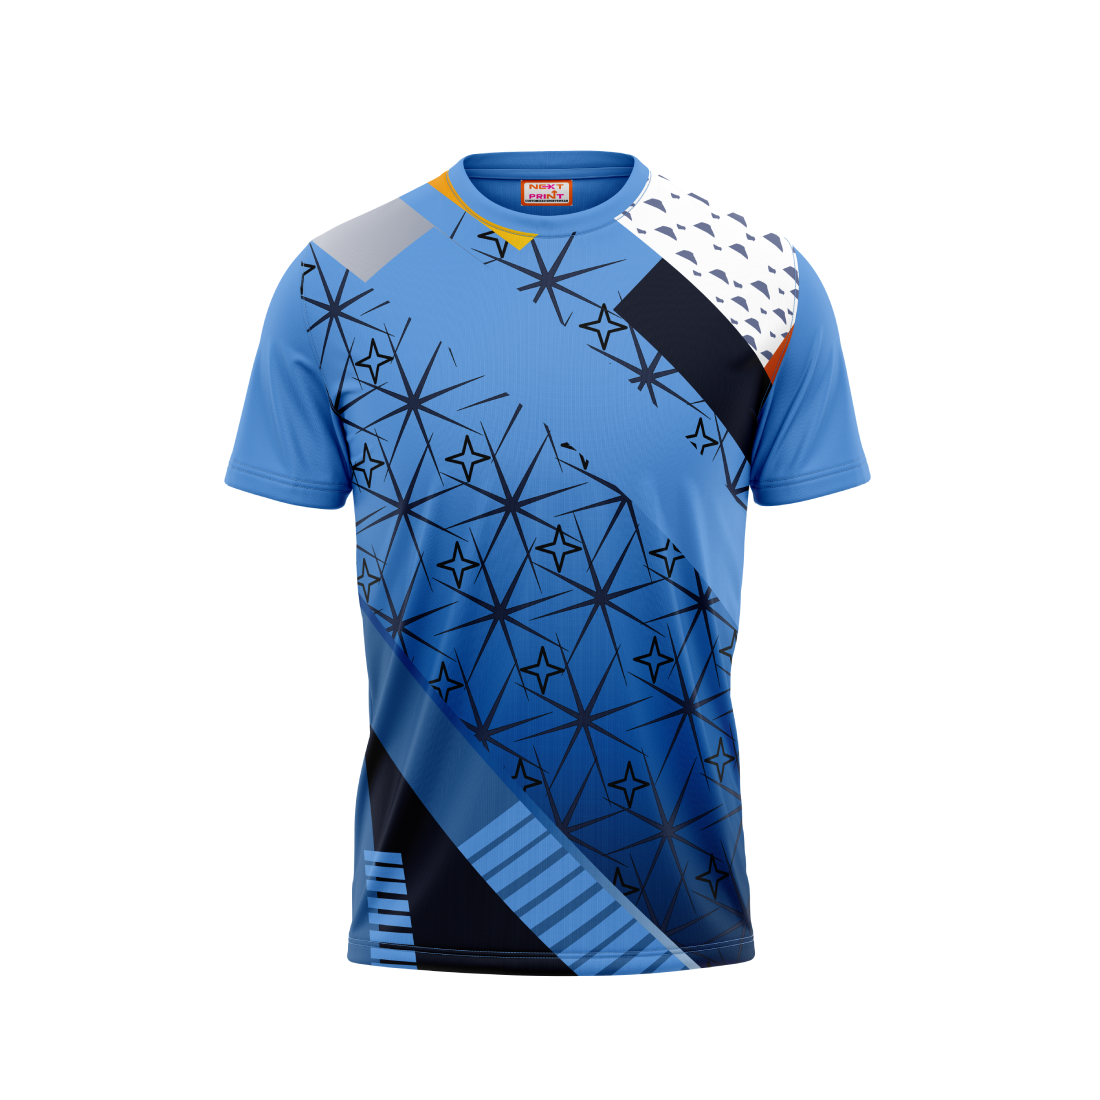 Round Neck Printed Jersey Skyblue NP50000557